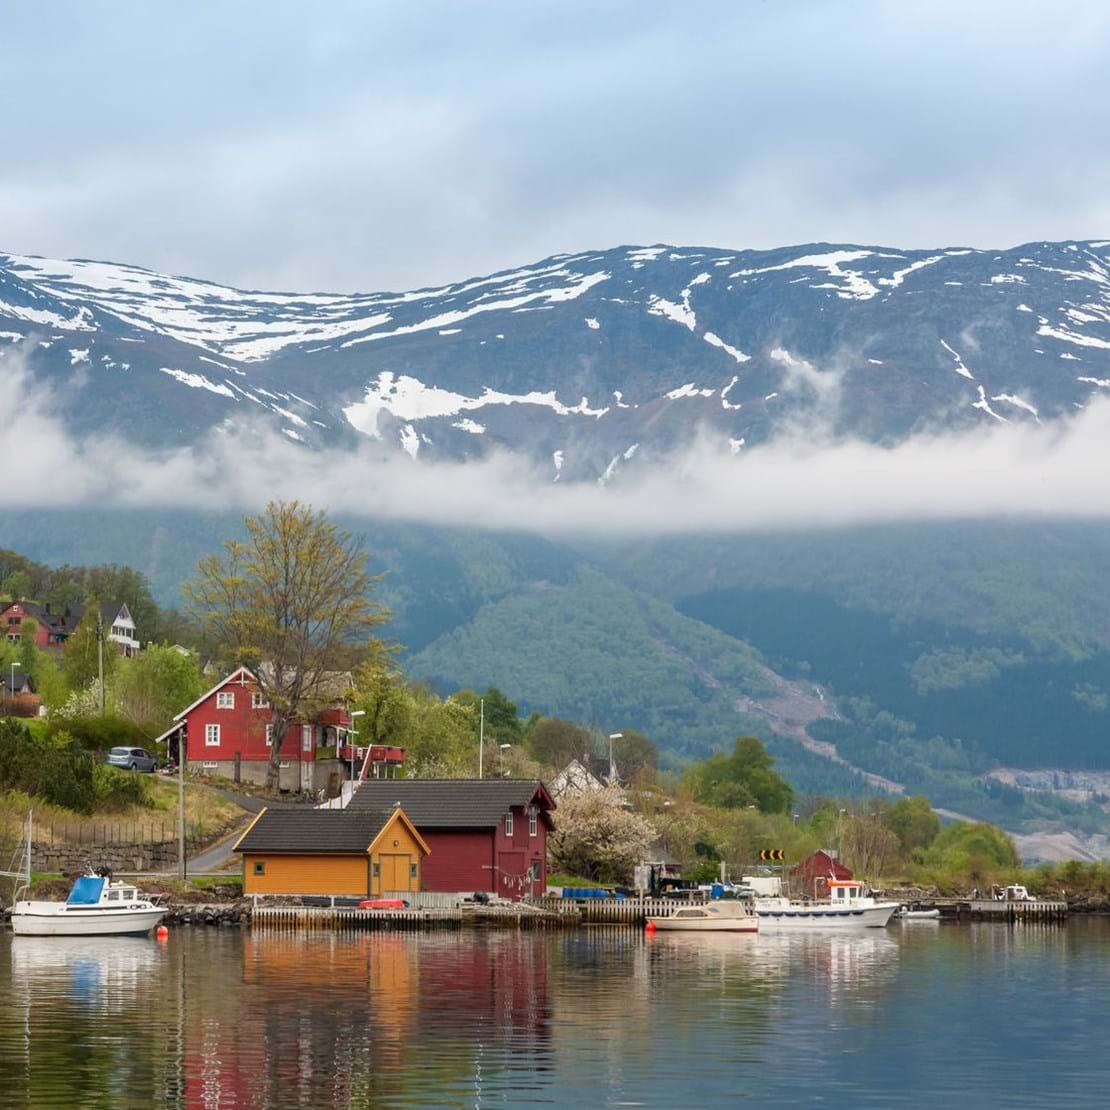 tours from amsterdam to norway